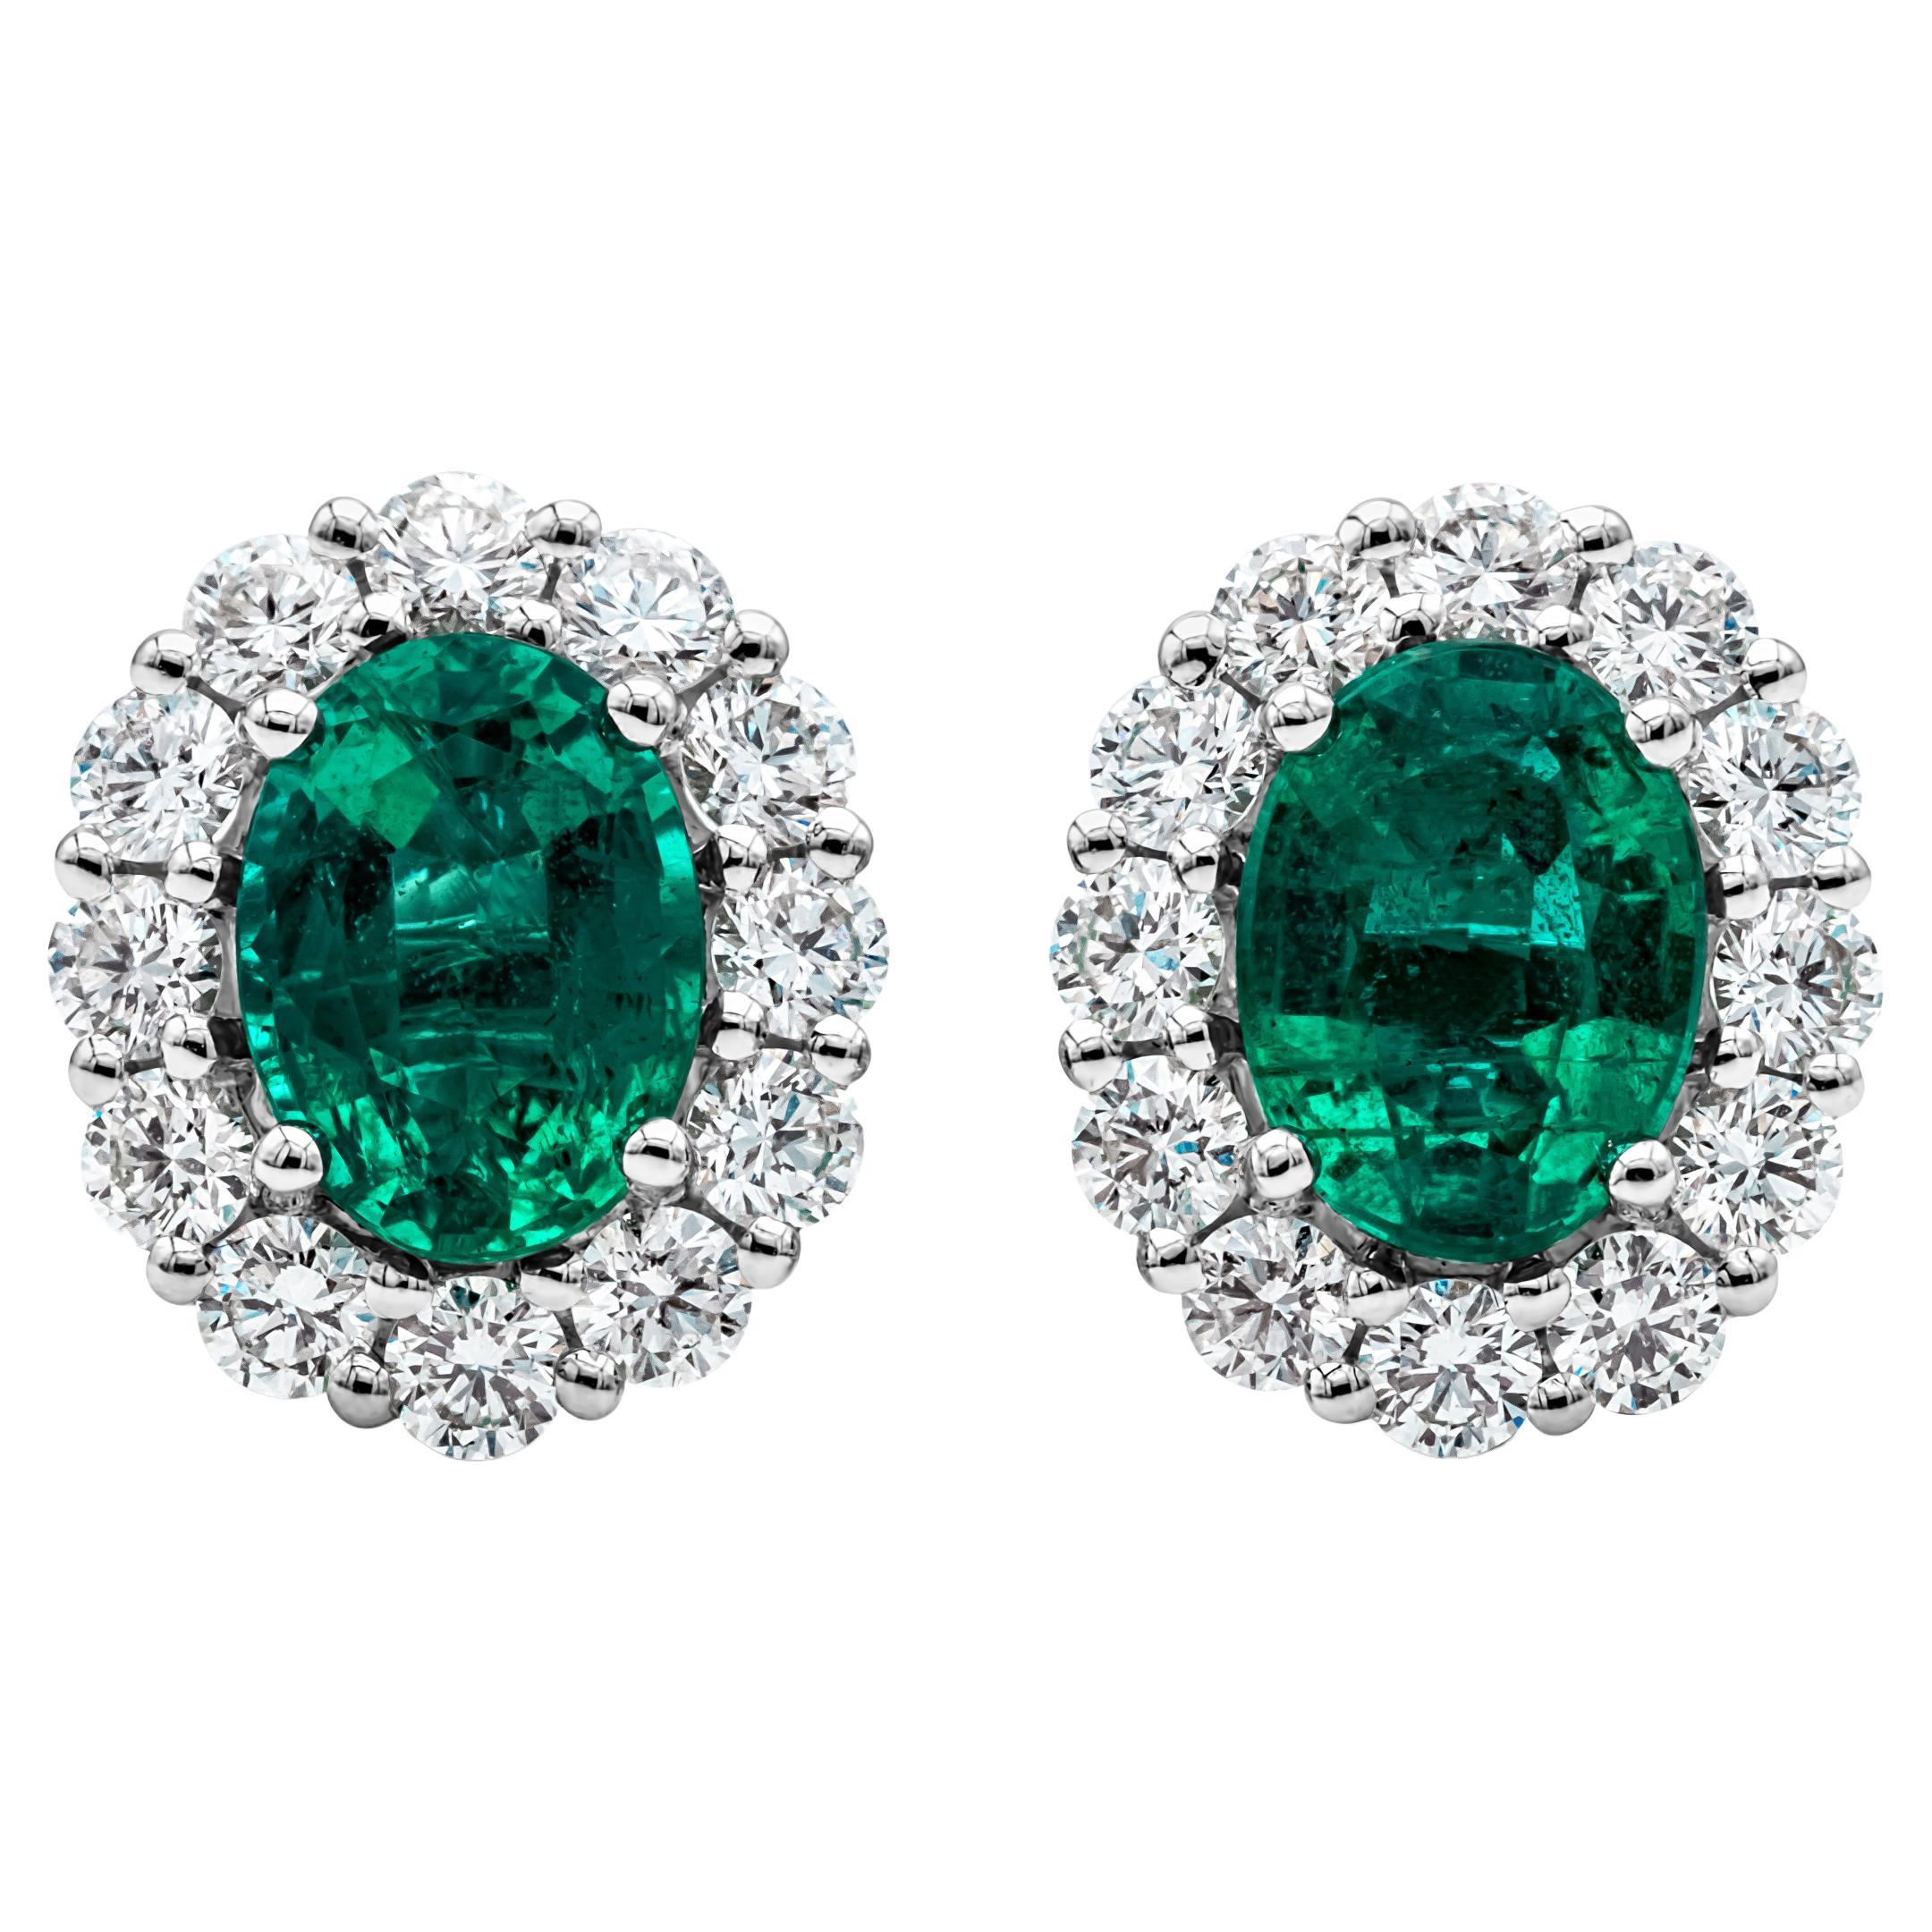 2.18 Carats Total Oval Cut Green Emerald and Diamond Halo Stud Earrings For Sale